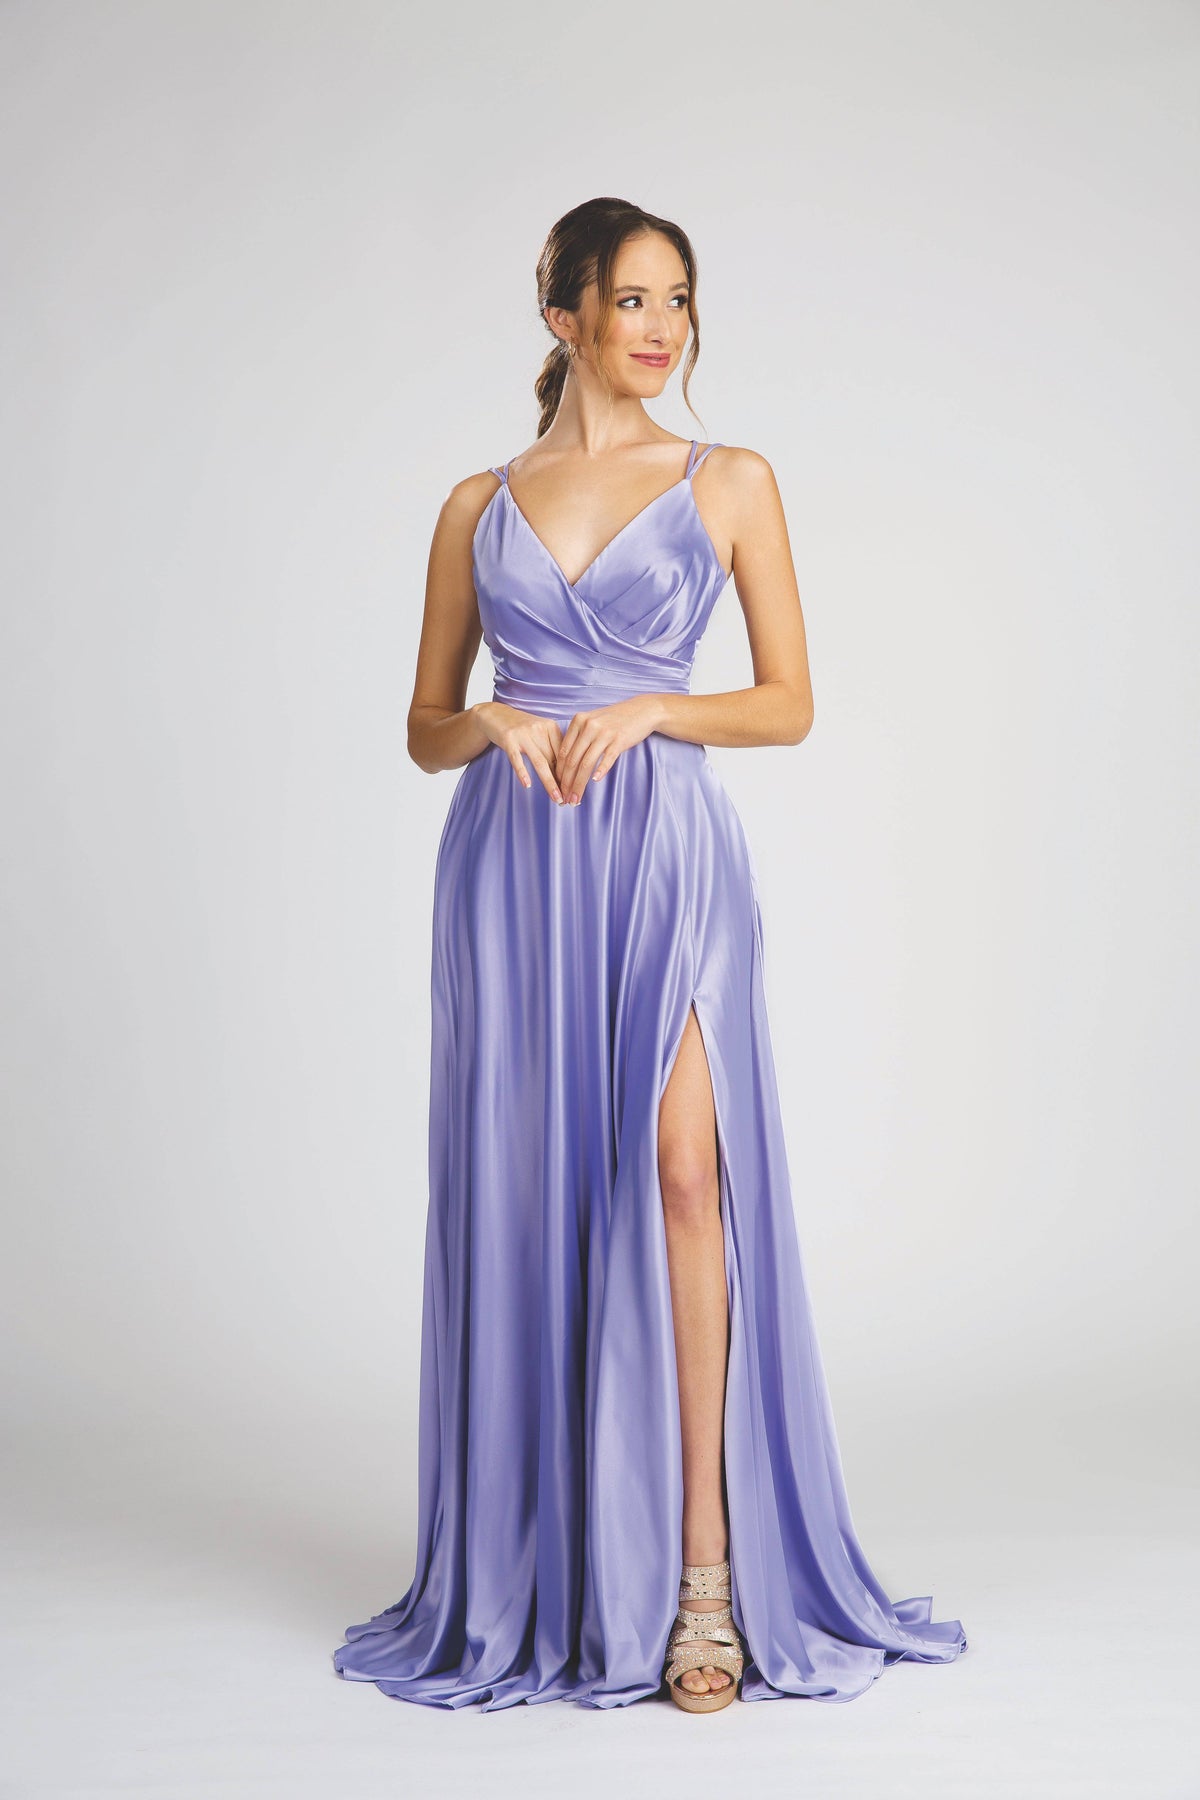 Fiesta Fashions 5102 Stunning Slit Leg Pleated V Neck Dress With Pockets - NORMA REED